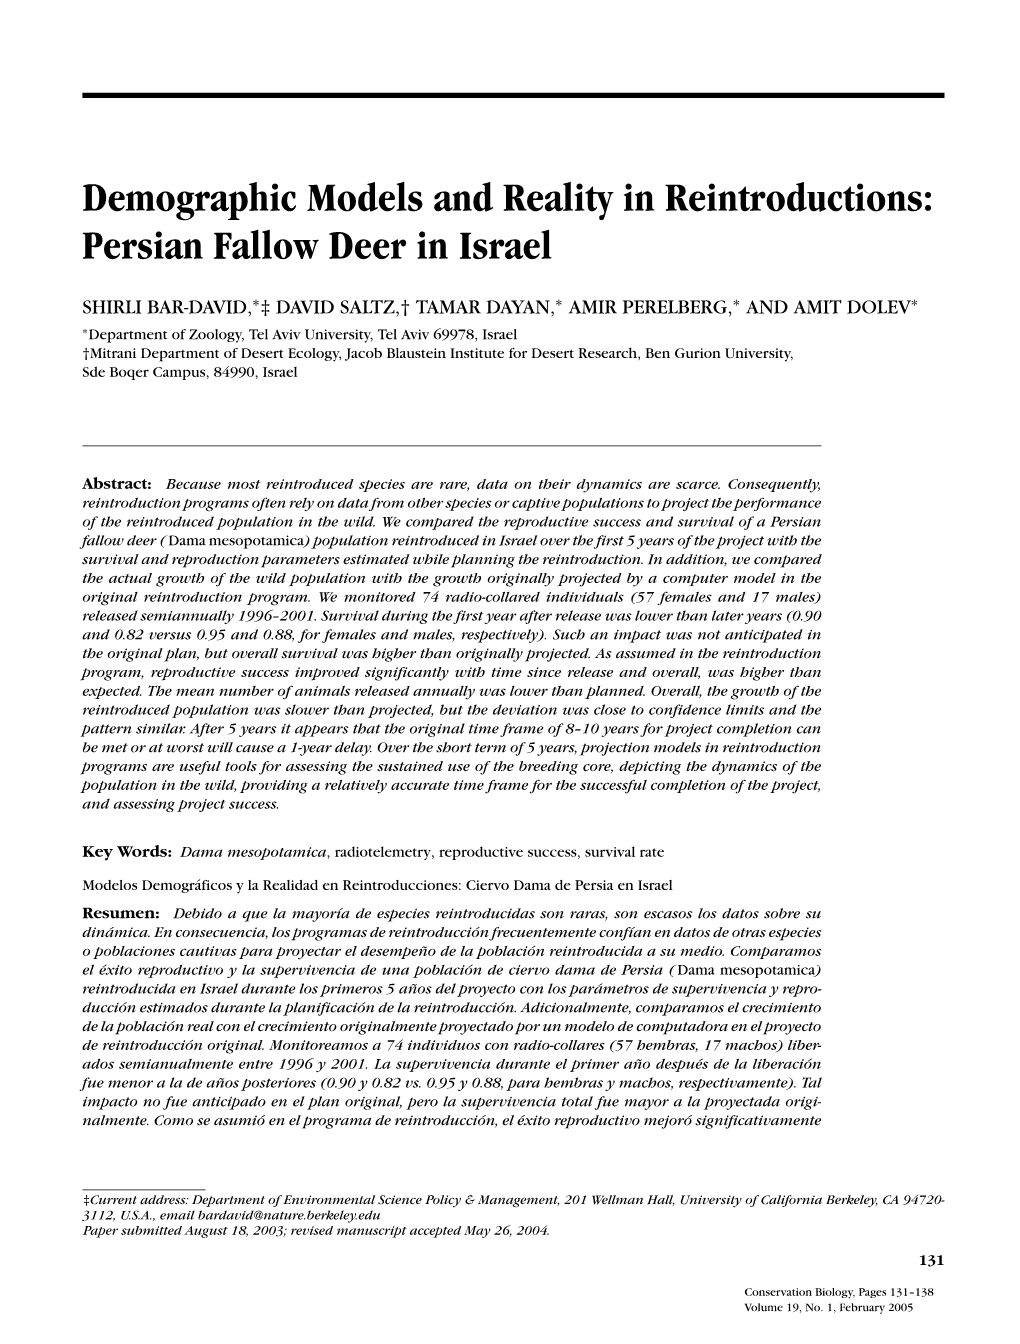 Demographic Models and Reality in Reintroductions: the Persian Fallow